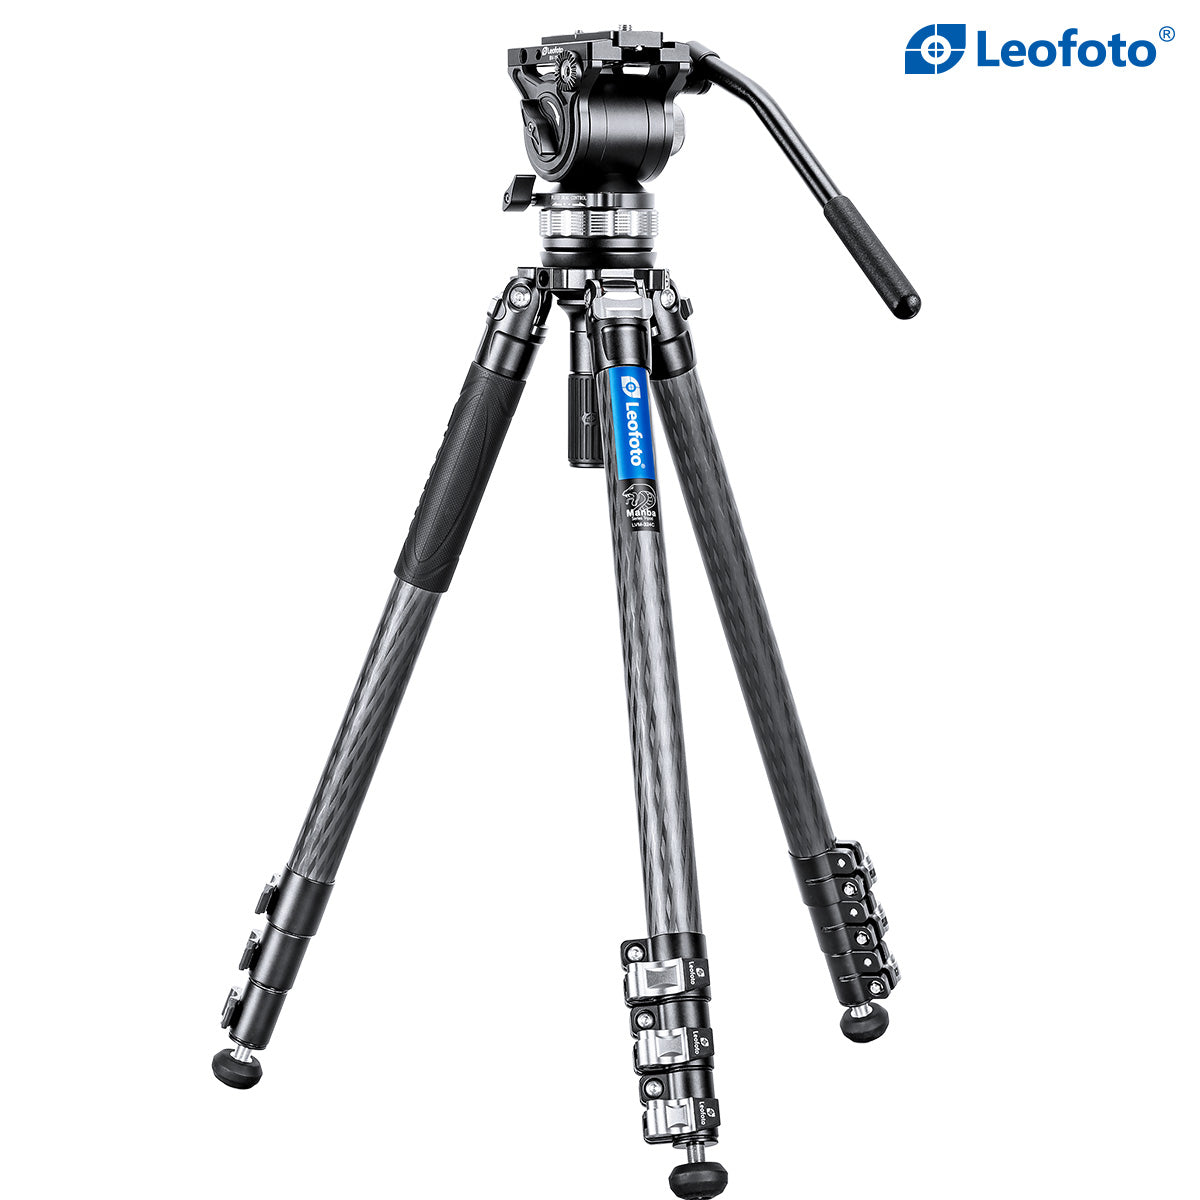 Leofoto LVM-324C+BV-15 4-Section Carbon Fiber Video Tripod with Fluid Head Set | 75mm Integrated Bowl with Leveling Base and Handle